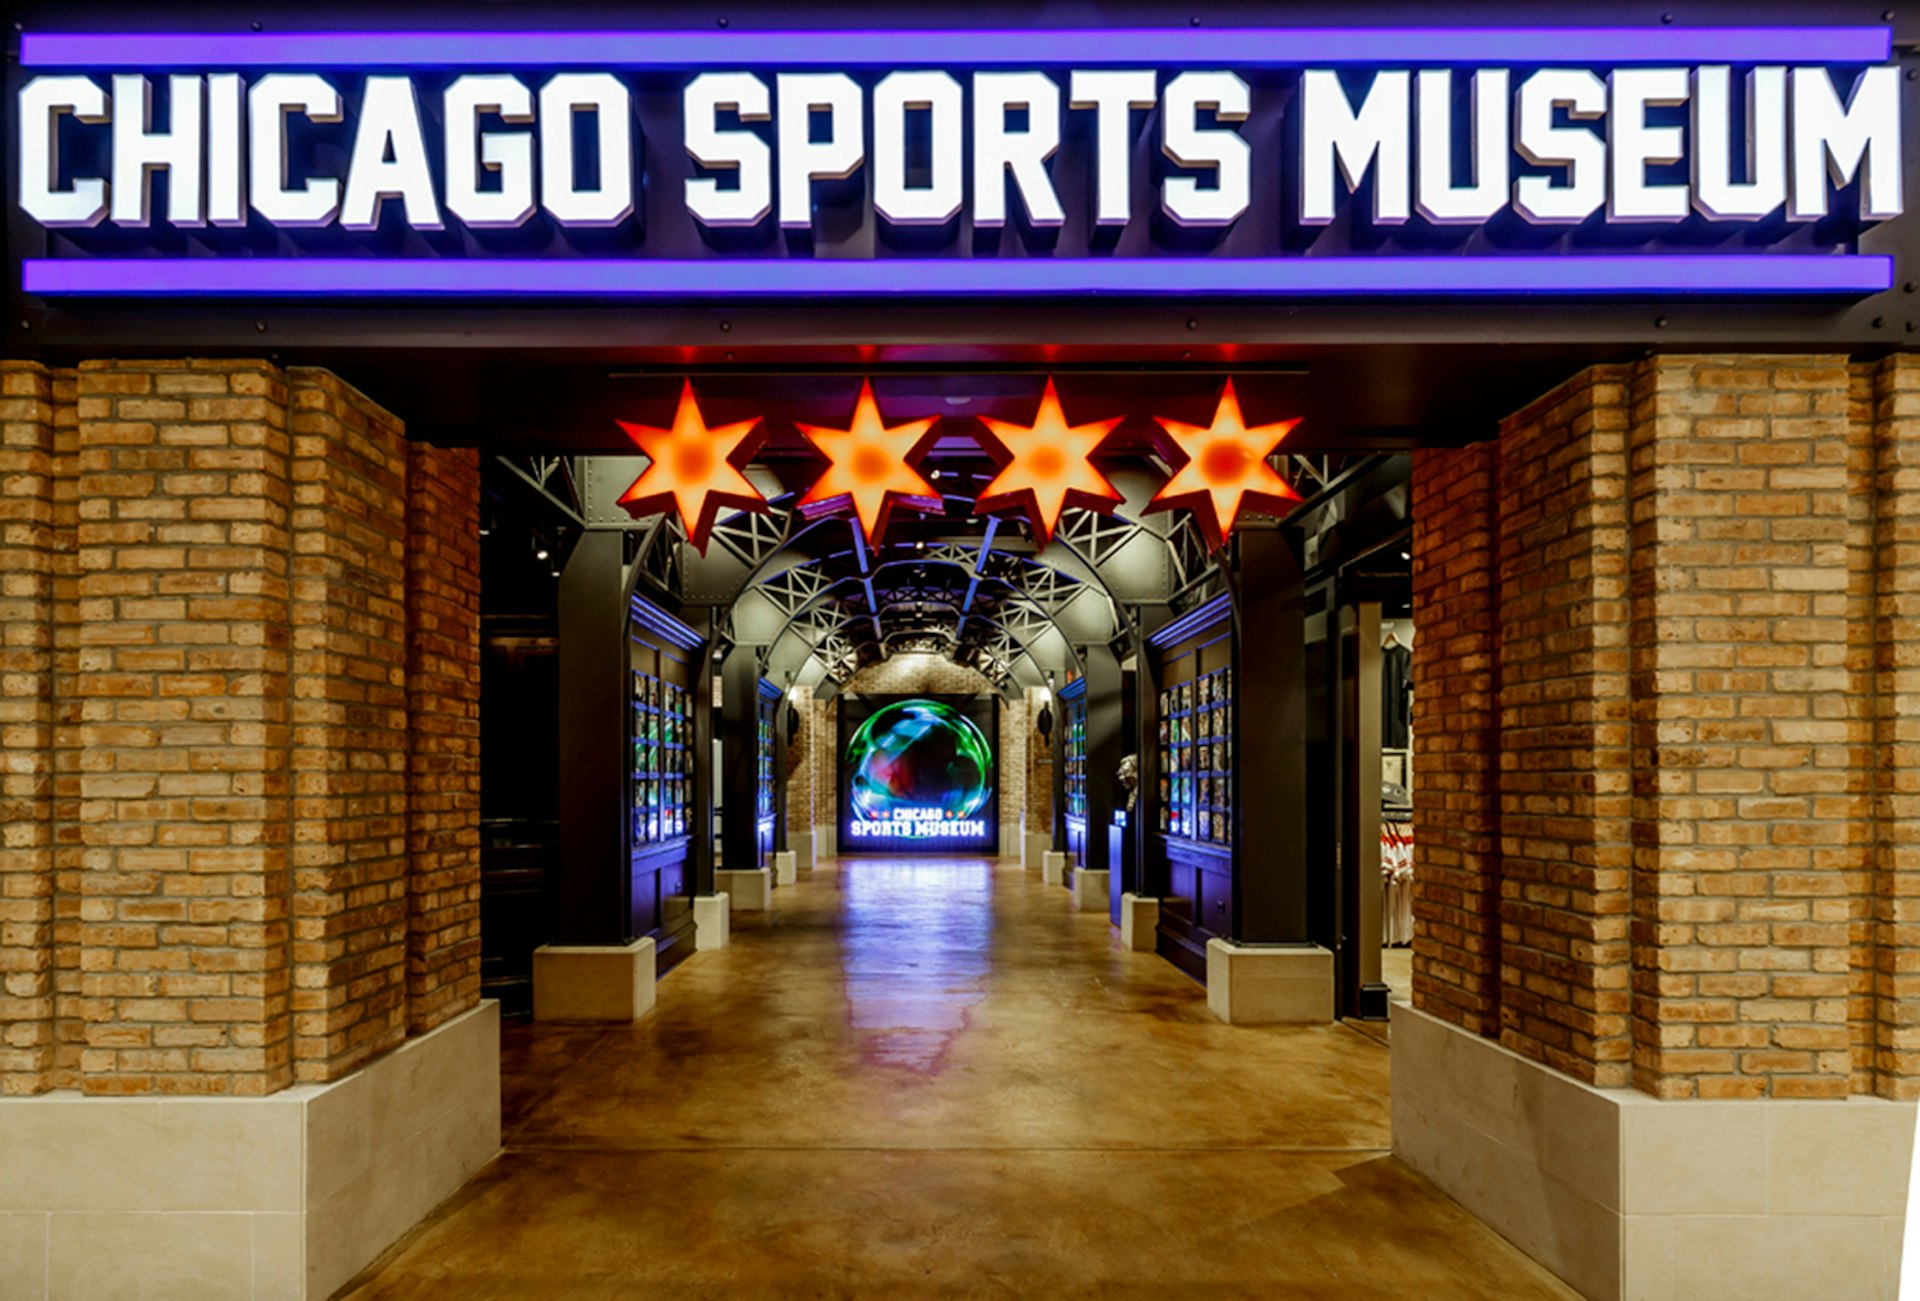 brick pilllars and a bold blue sign mark the entrance of Chicago Sports Museum